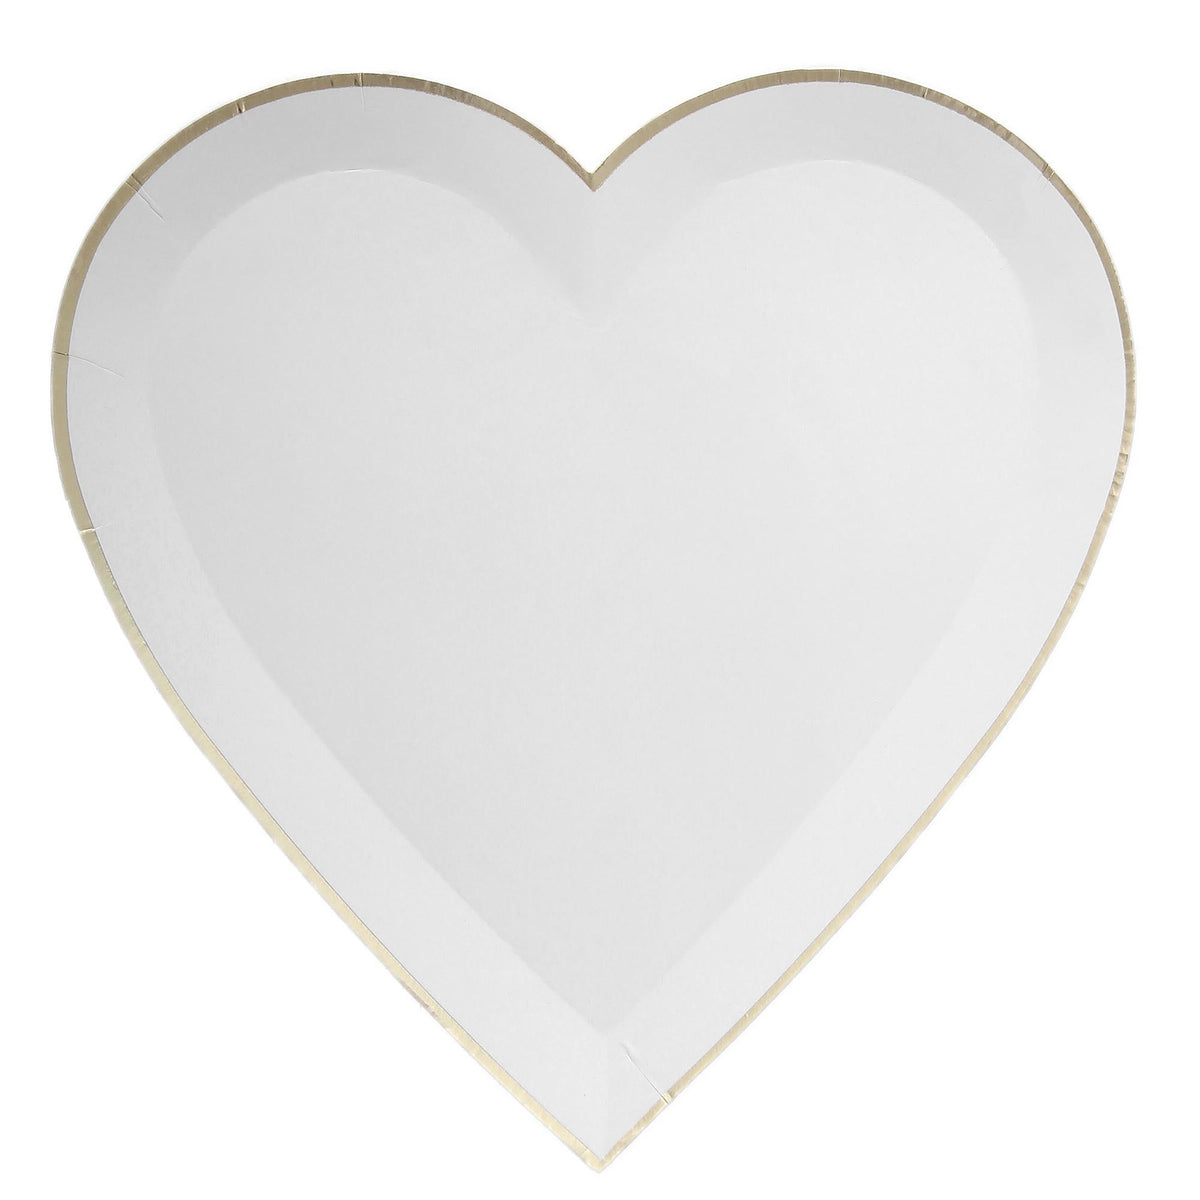 YIWU SANDY PAPER PRODUCTS CO., LTD Everyday Entertaining Large Heart Shaped Lunch Paper Plates, White, 9 Inches, 8 Count 810120712918